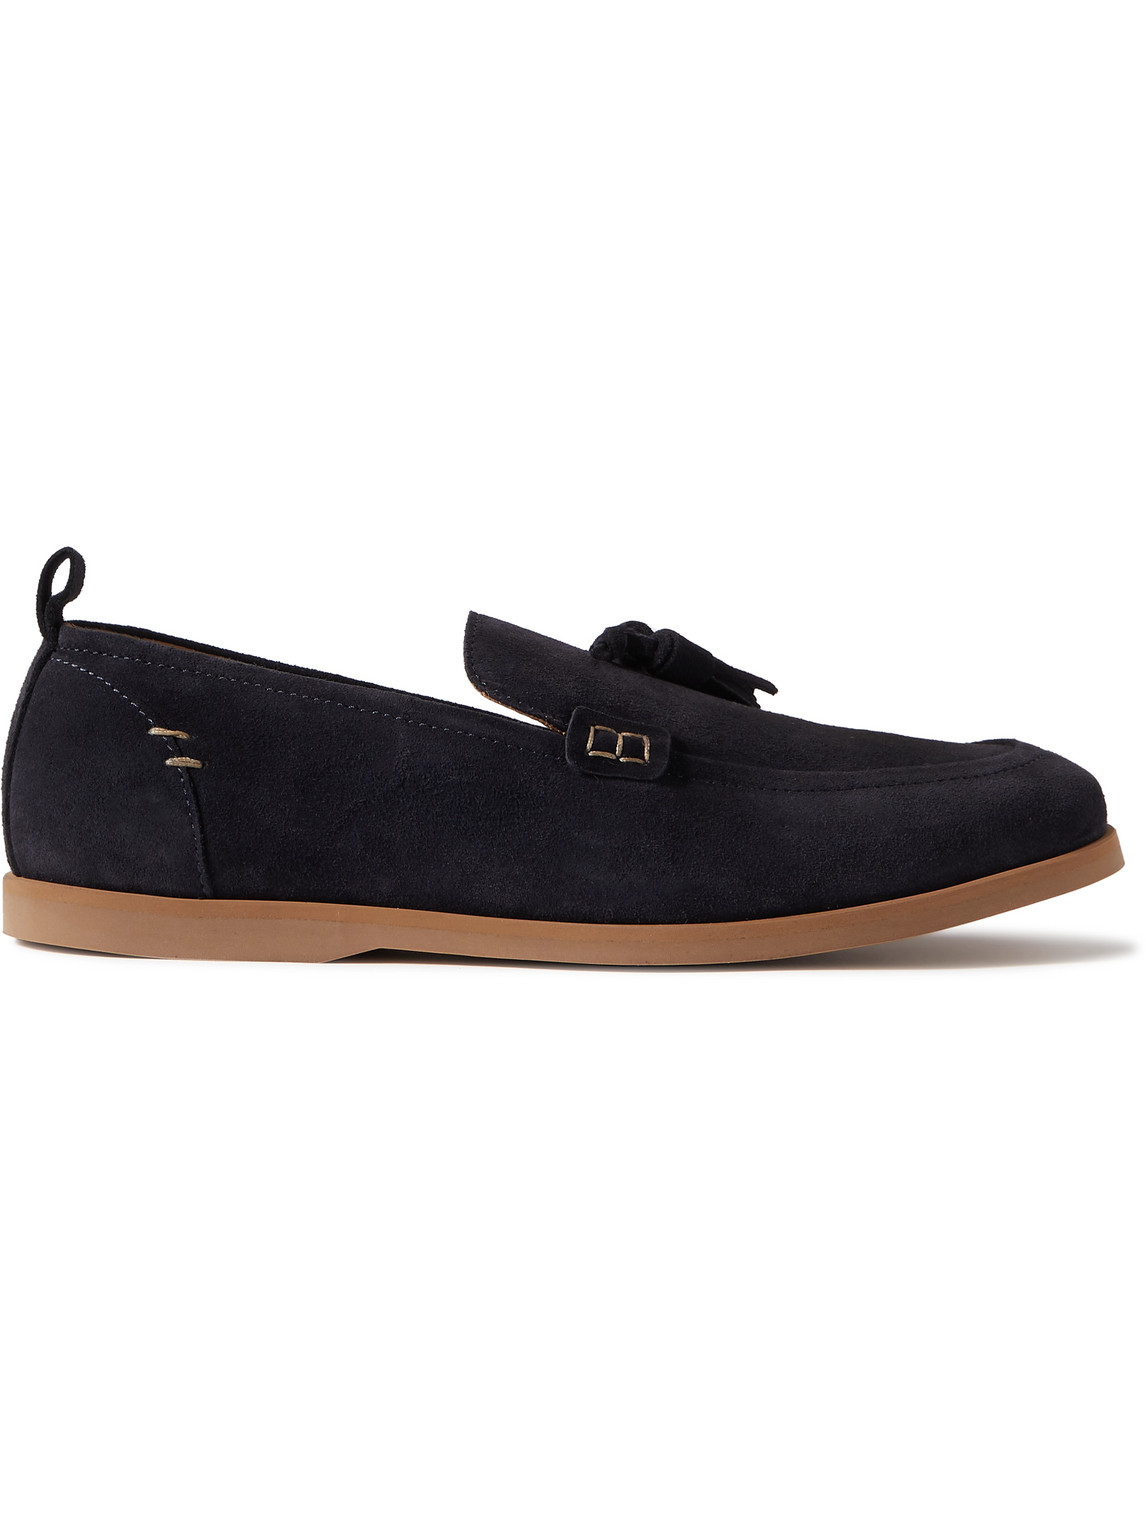 Leo Tasselled Suede Loafers